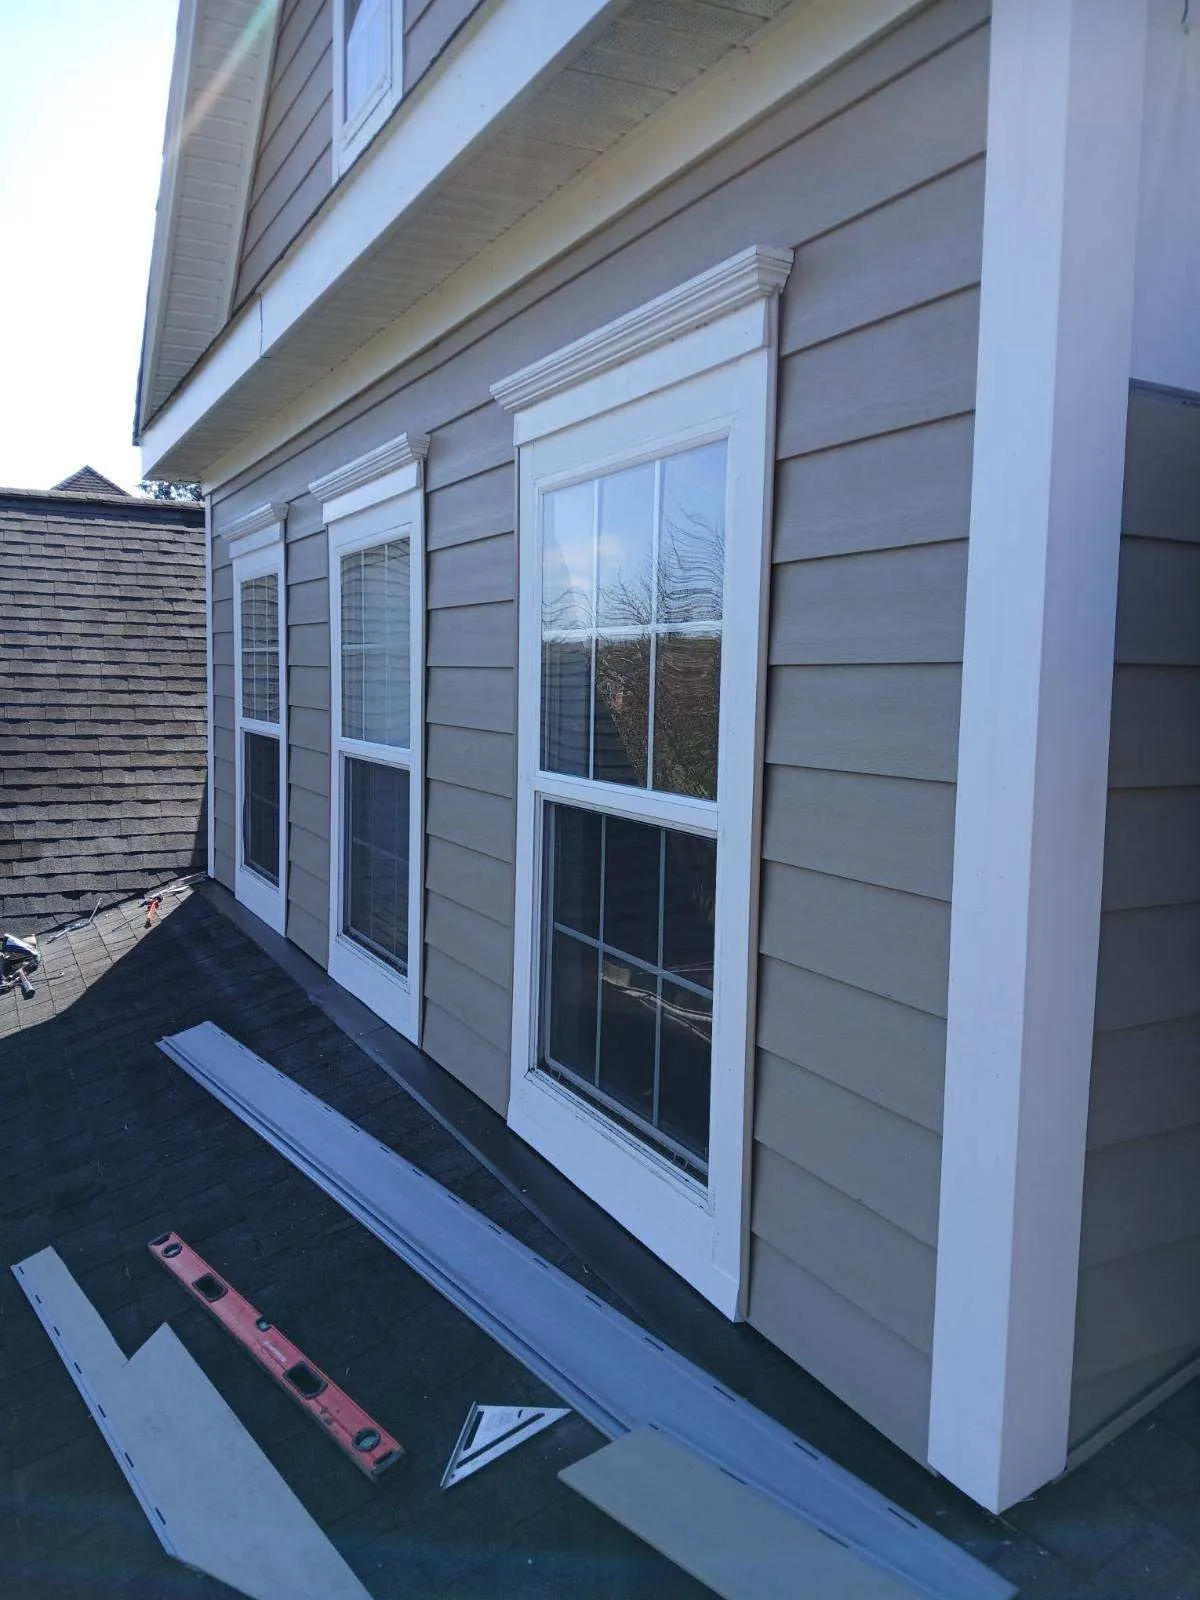 The Benefits of Vinyl Siding for Your Home's Exterior